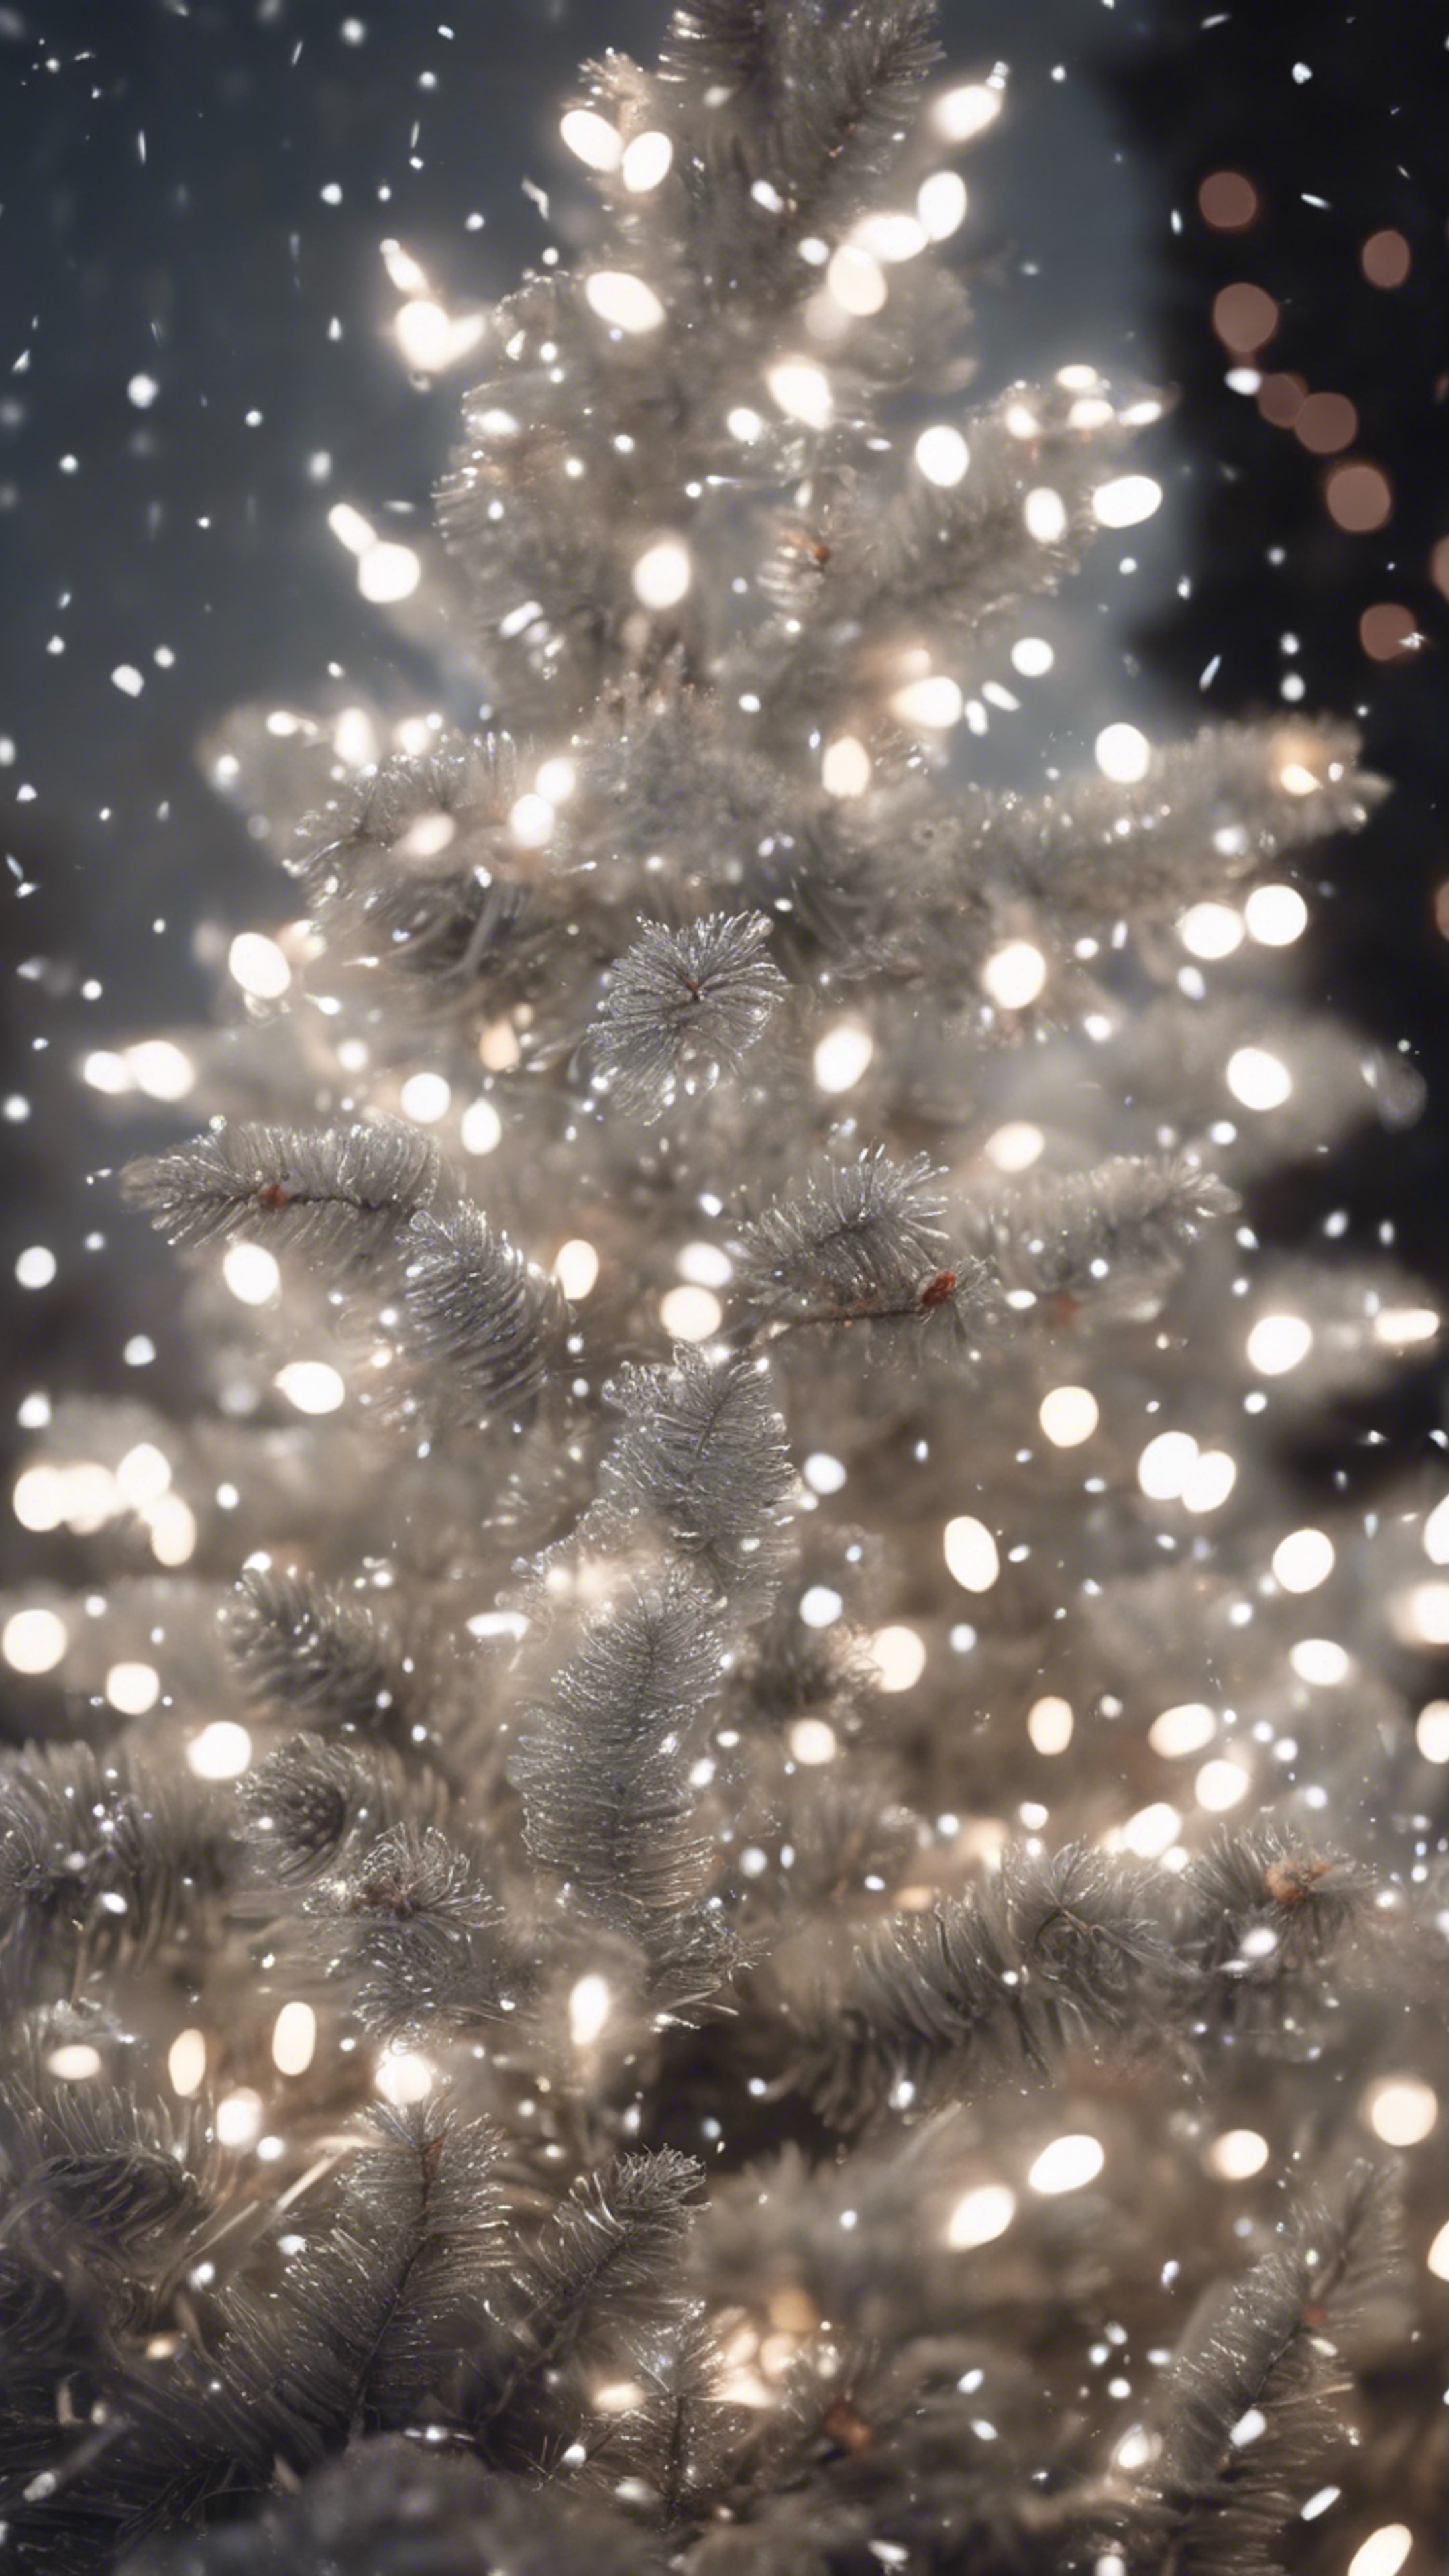 White Christmas lights shimmering on a silver spruce tree, with delicate snowflakes falling around. Tapet[aebc3baa8421448a9f7c]